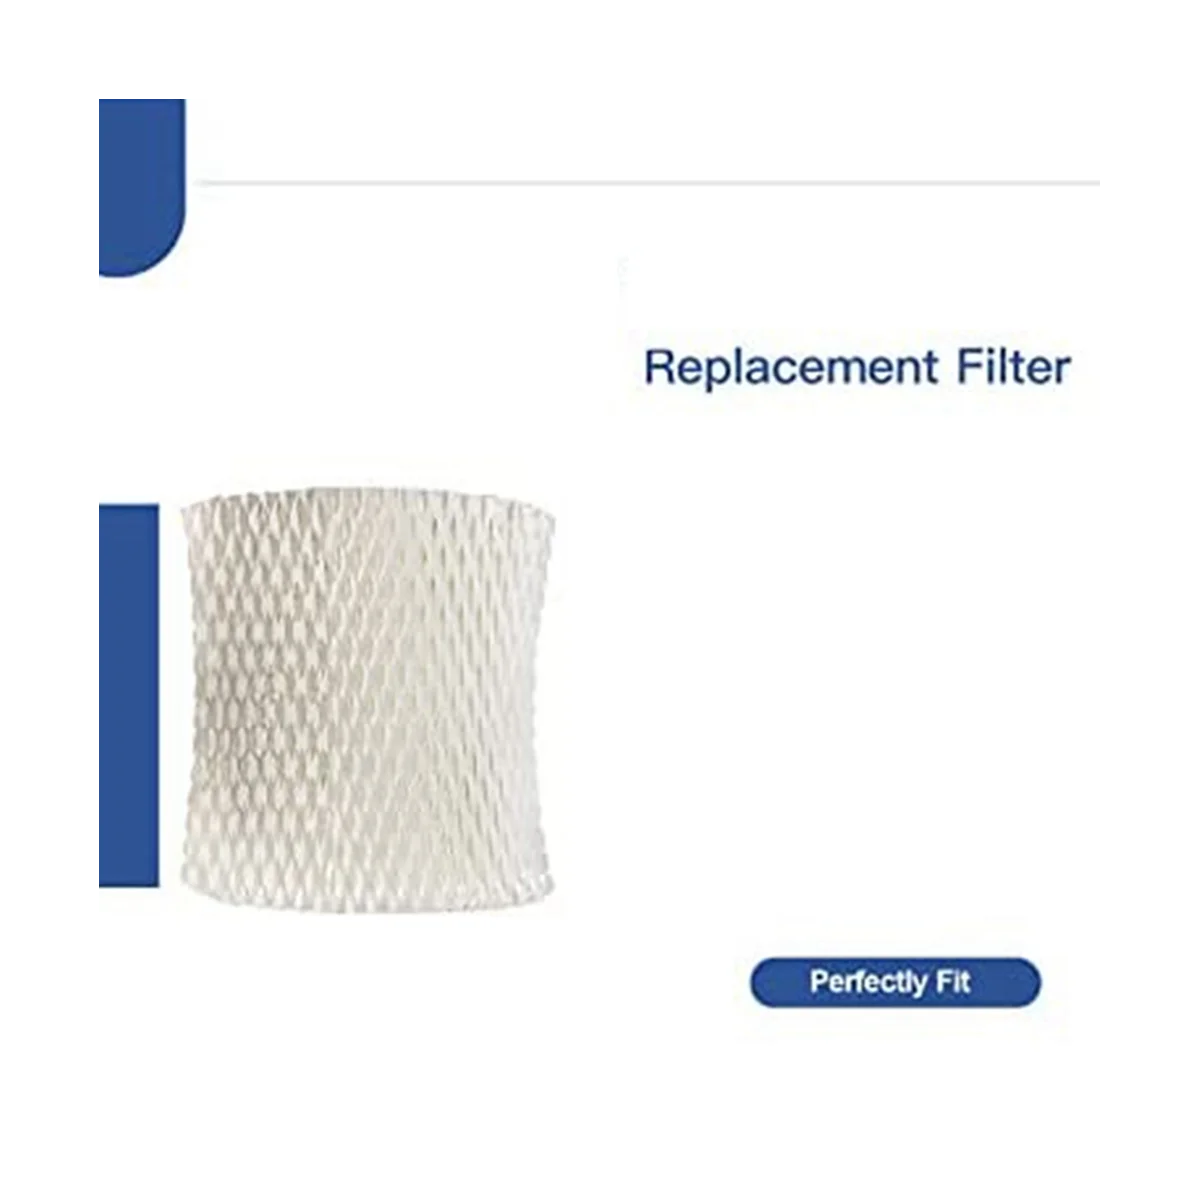 8Pcs Replacement Humidifier WF2 Wick Humidifier Filter for WF2 V3100 V3500N images - 6